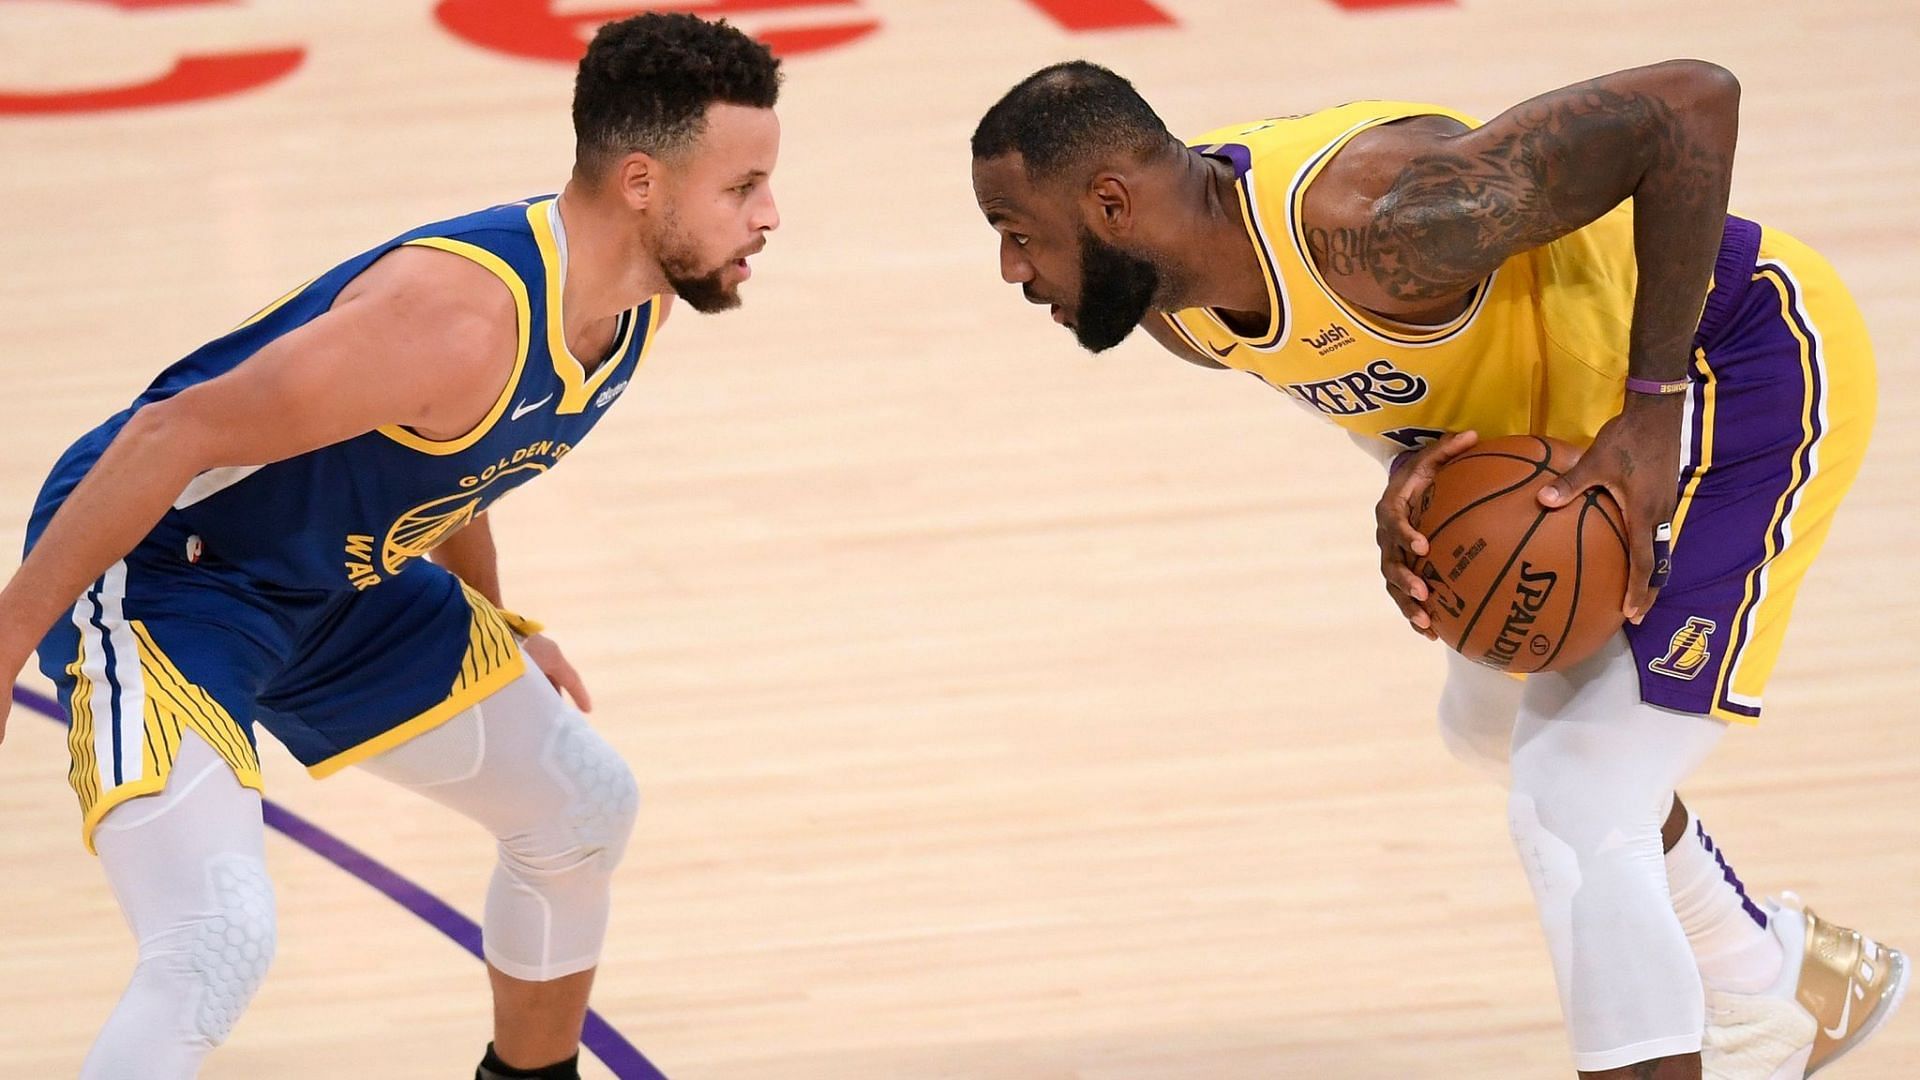 NBA analyst JJ Redick asserts that LeBron James, right, is the face of this generation over Steph Curry, left. [Photo: Sky Sports]